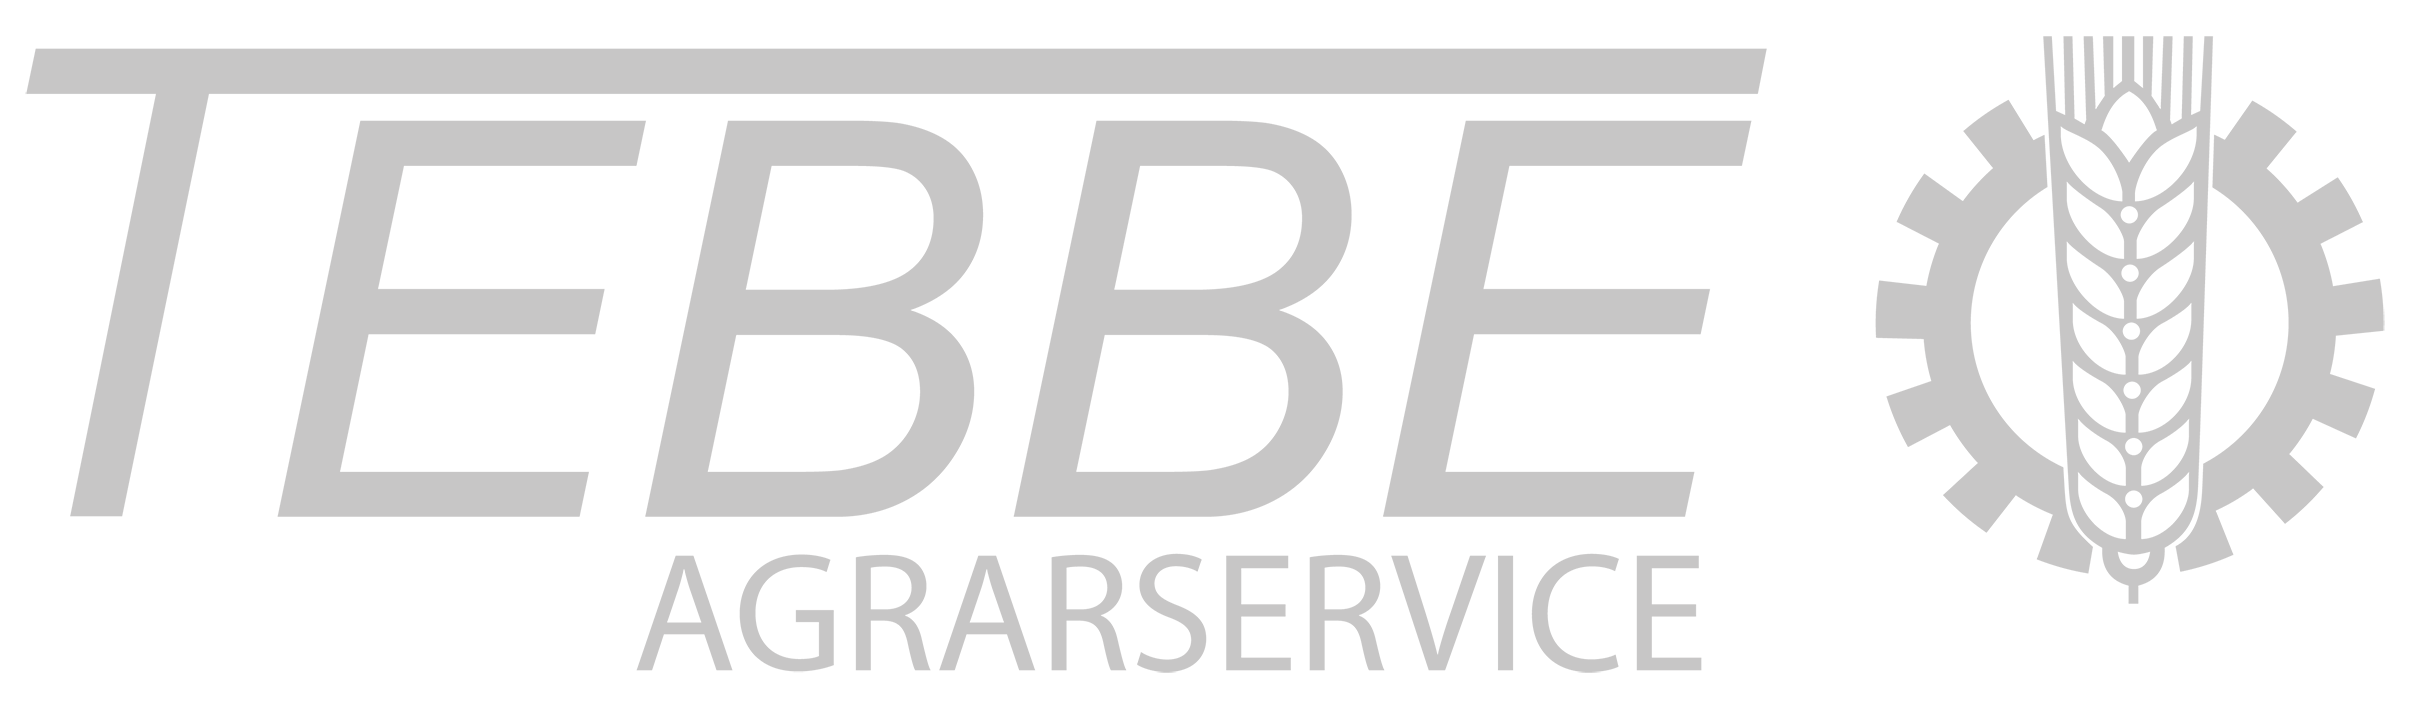 Tebbe Agrarservice